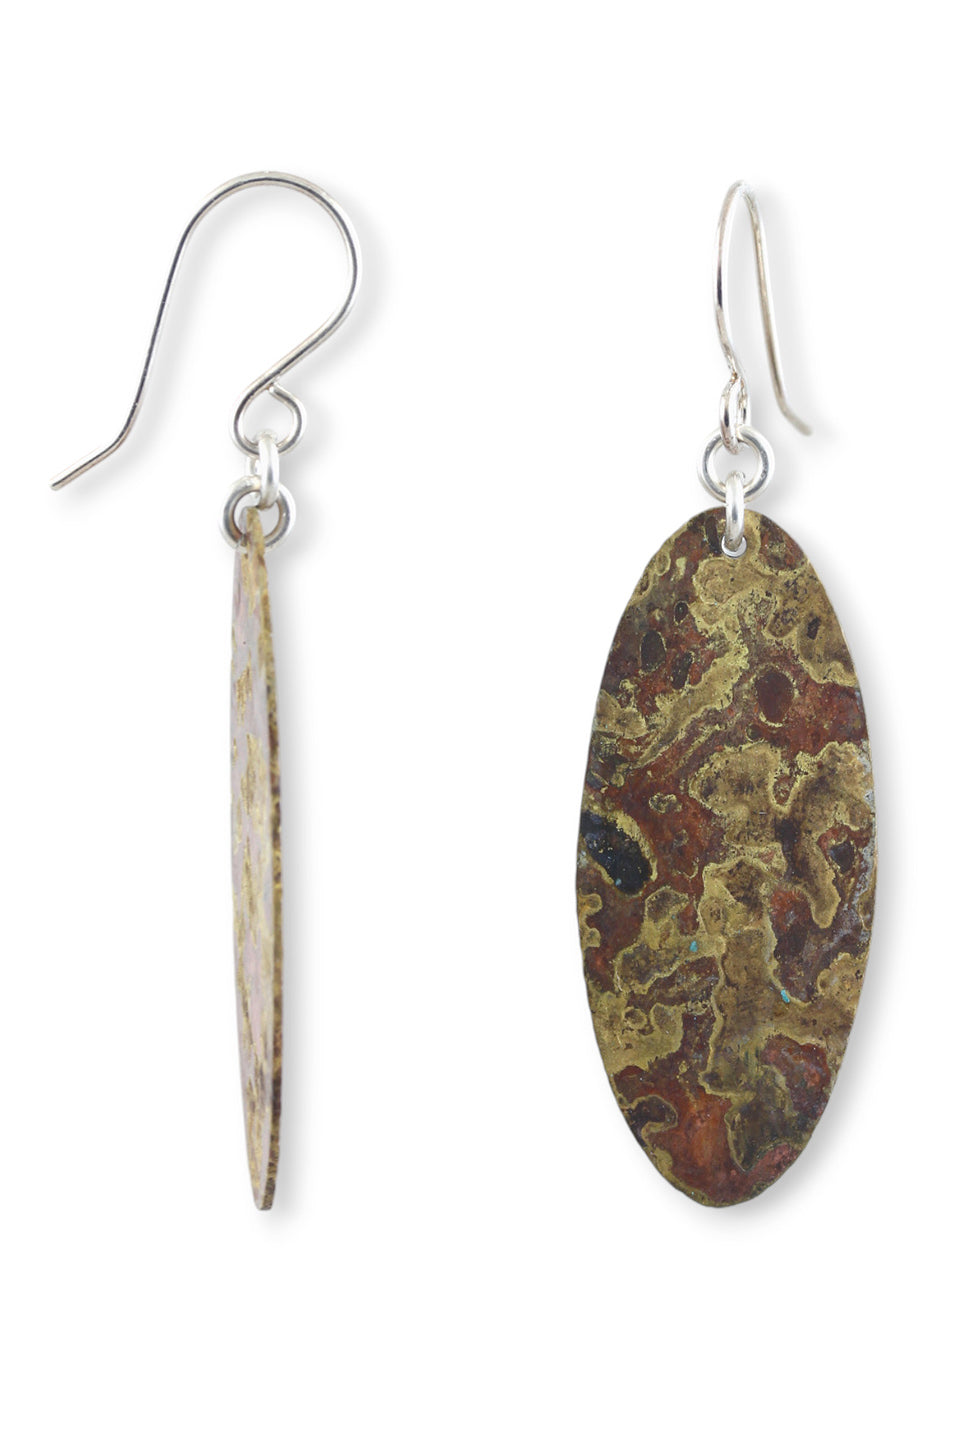 Patina: Antiqued Brass Oval Dangles